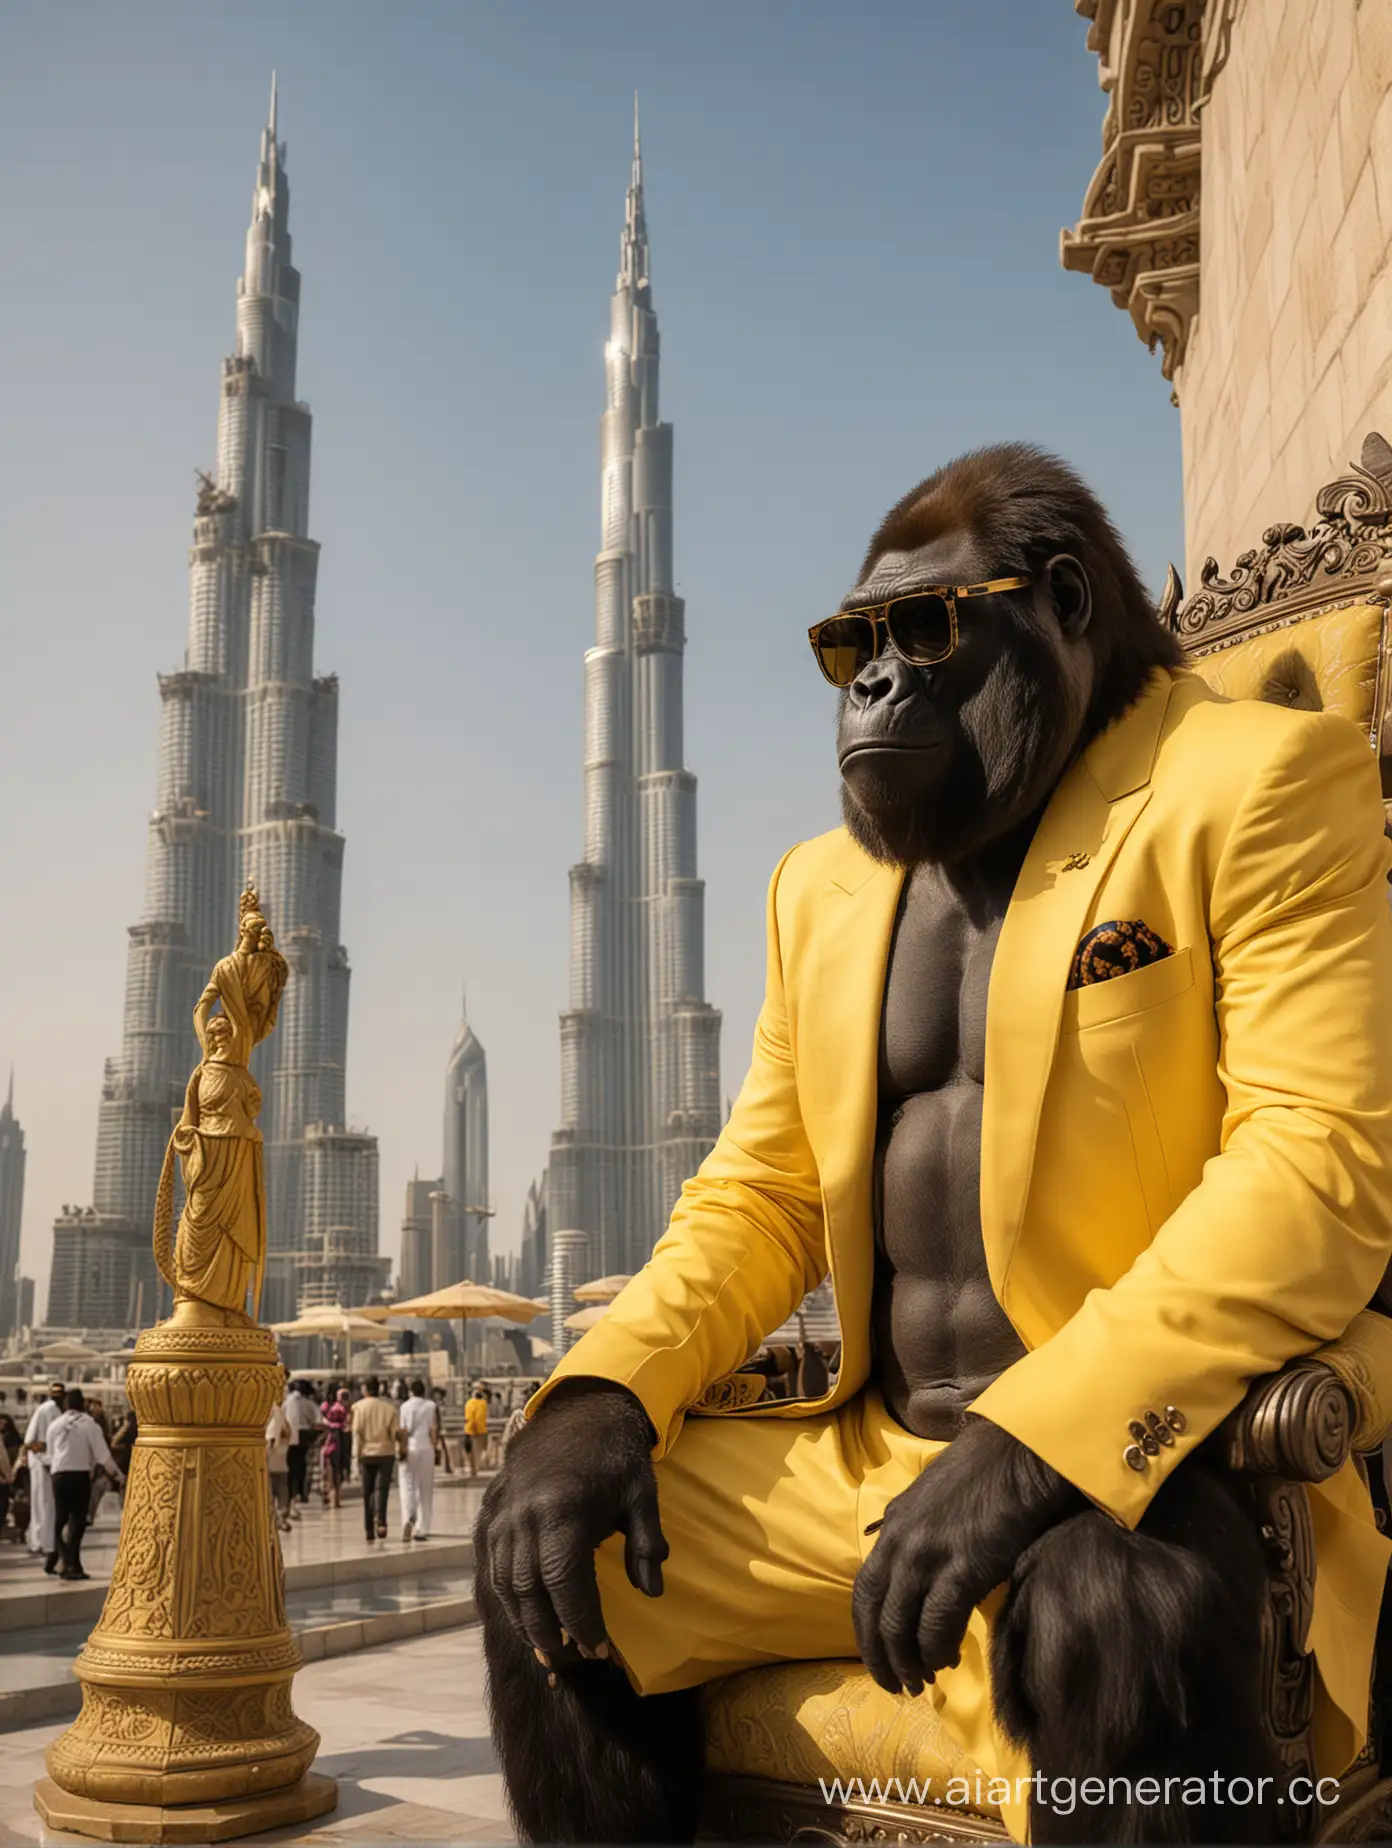 Gorilla-Sheikh-in-Yellow-Suit-with-Classic-Lamp-and-Burj-Khalifa-in-Background